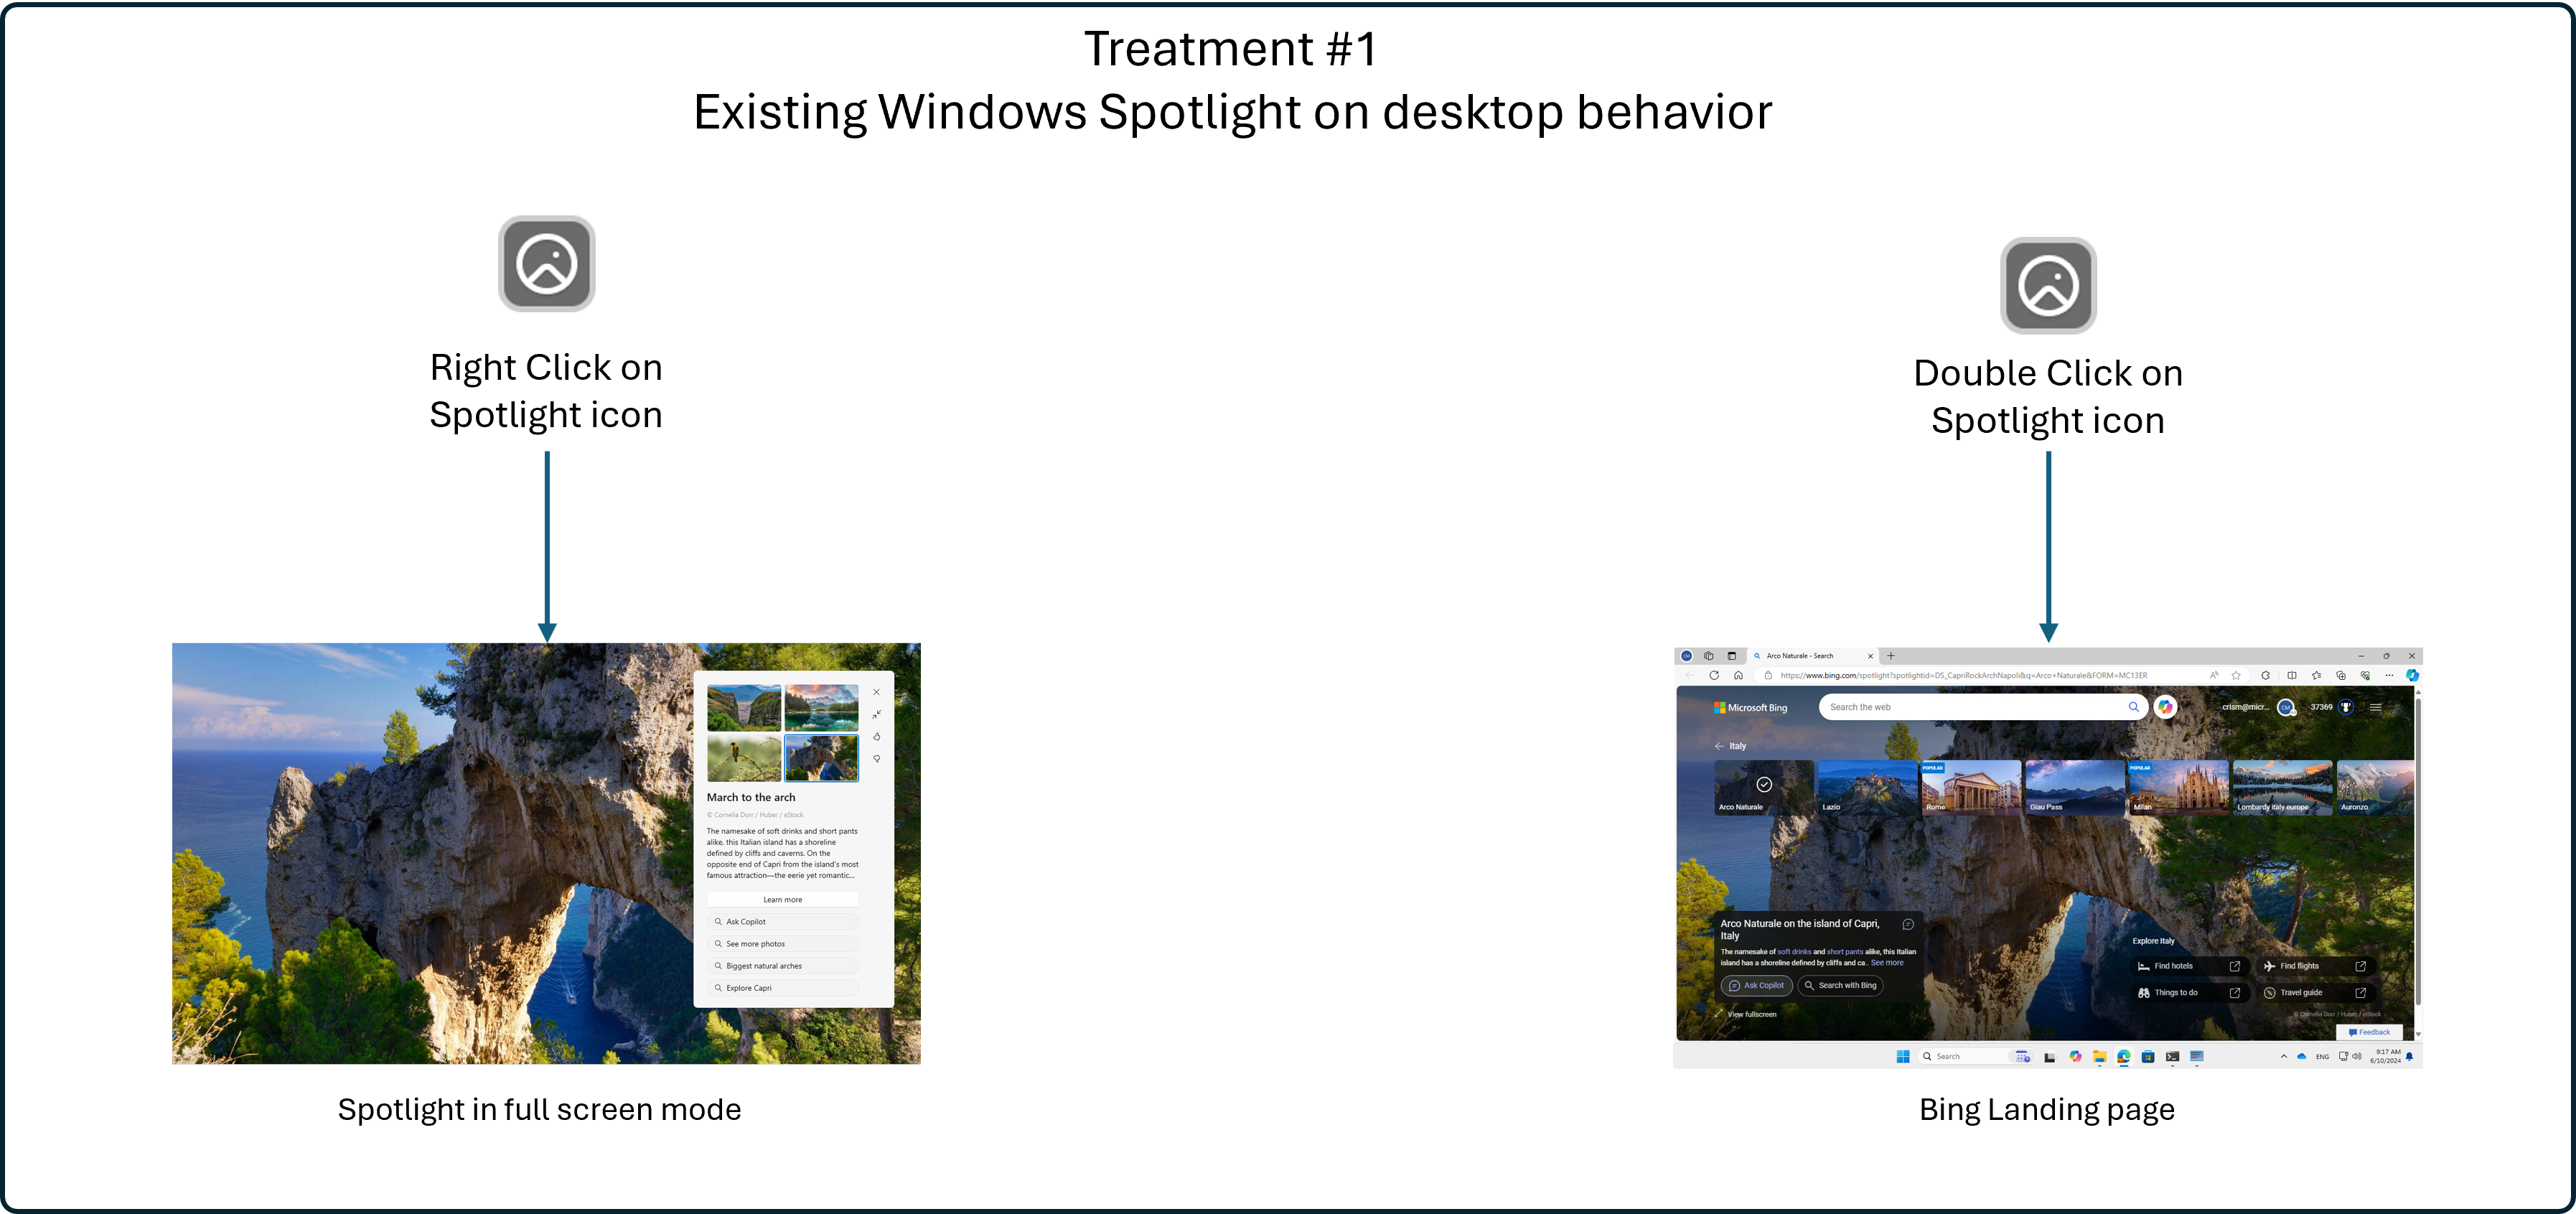 Treatment #1 – if a user right-clicks on the Windows Spotlight icon it will launch the Spotlight experience in full screen mode, while double-clicking will open the Bing landing page for the image on desktop